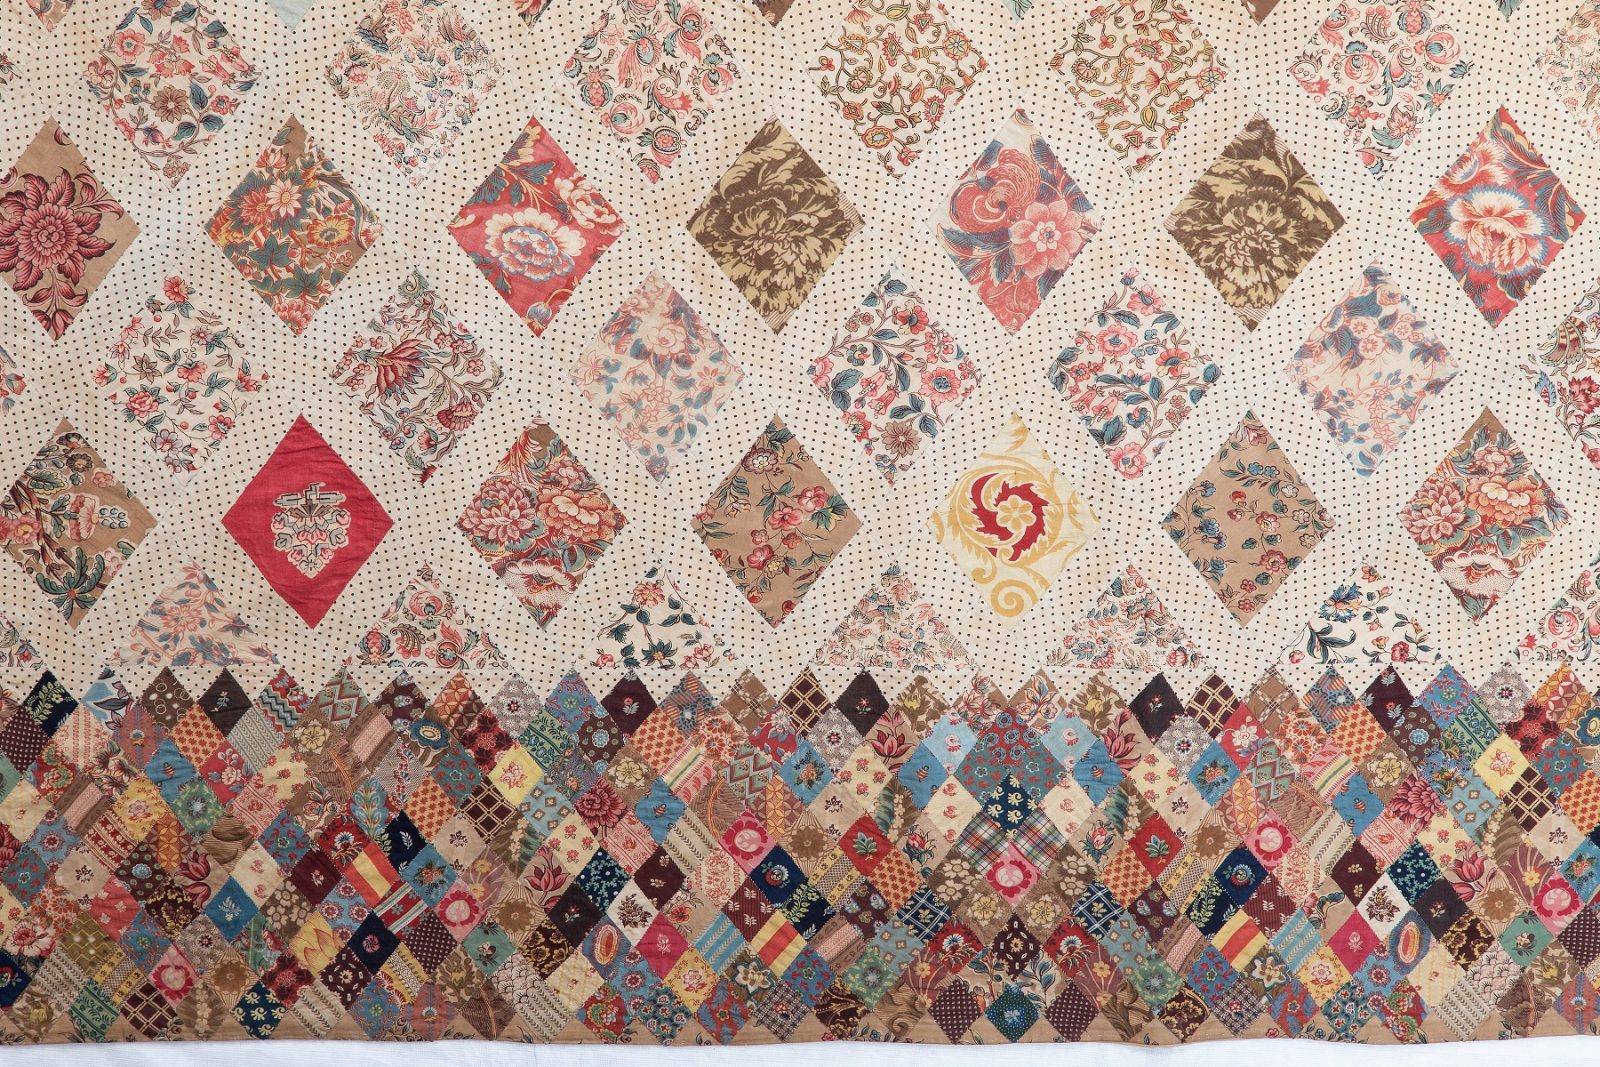 Austen family patchwork coverlet, with large diamonds in floral dress fabrics, and a border of smaller diamonds.